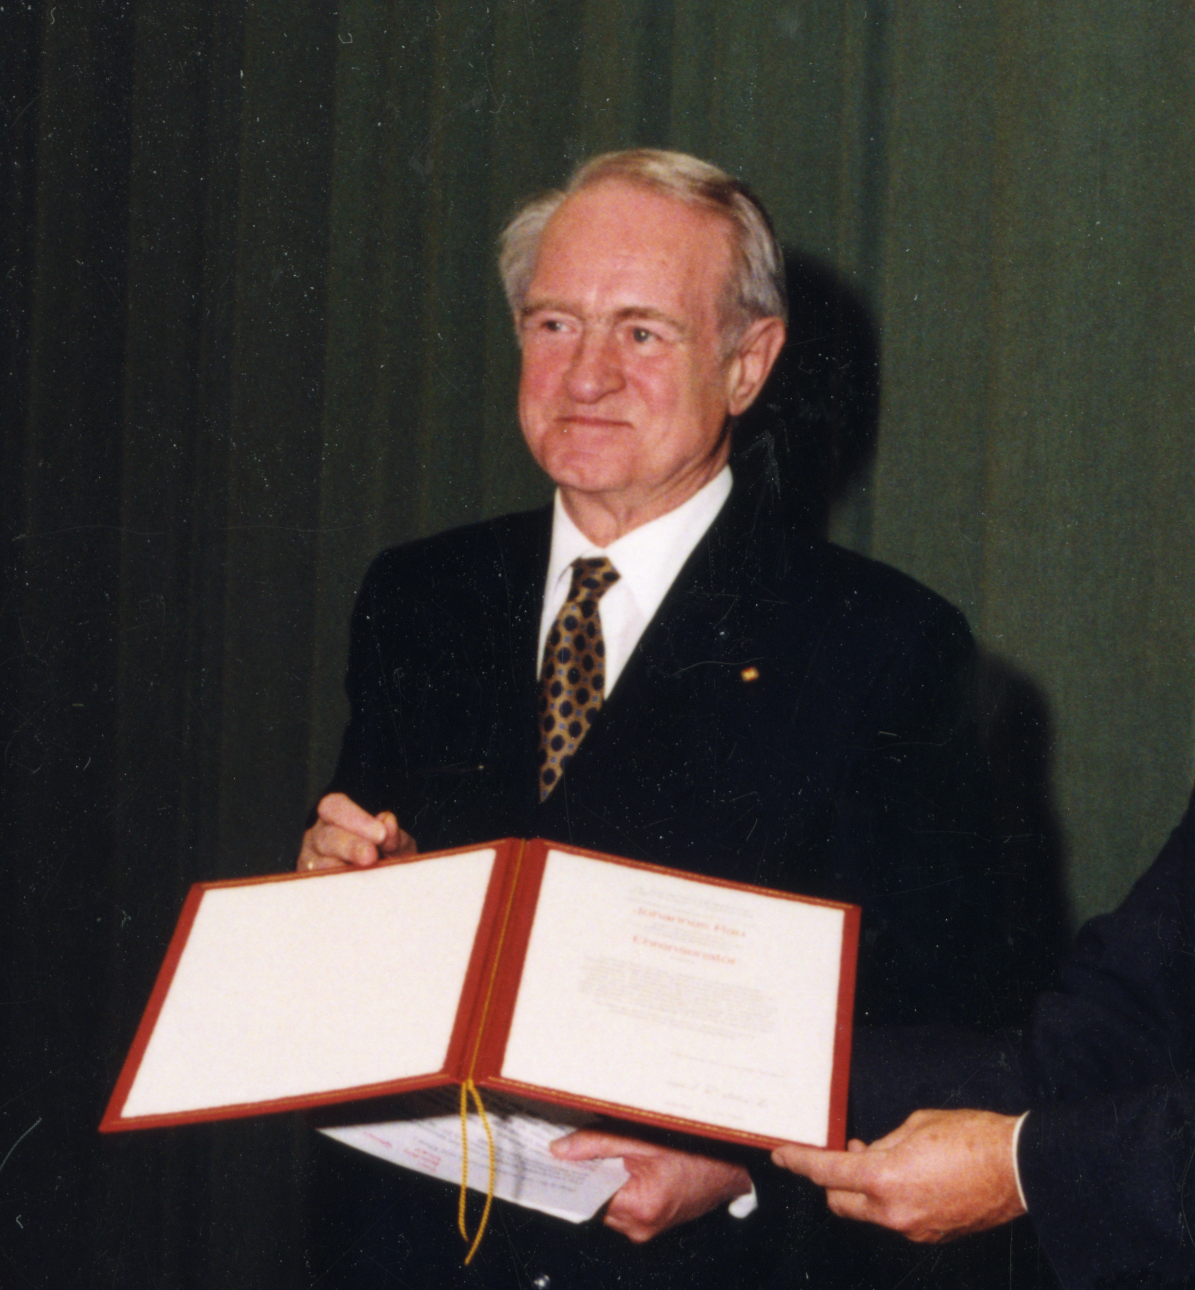 Photo cut-out of the award of honorary senator to Johannes Rau in 1998